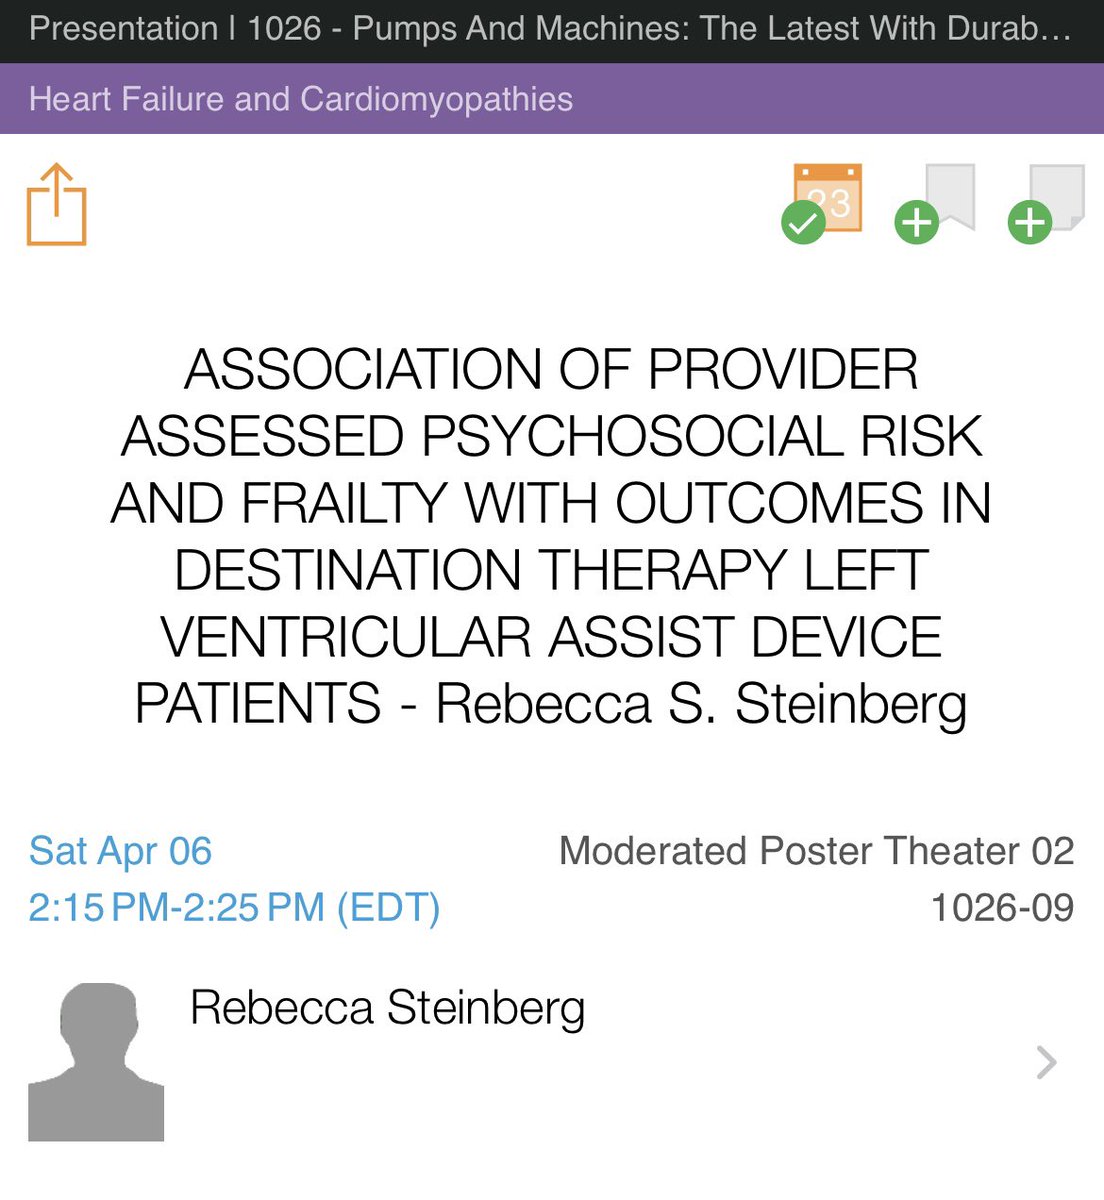 Come check out my ⭐️ mentee @RSteinbergMD presenting our work on psychosocial risk and outcomes in DT #LVAD patients as a moderated poster at #ACC24. Moderated Poster Theater 2 @ 2:15pm today! @emory_heart @shelleyhallmd @preventfailure @amorrismd